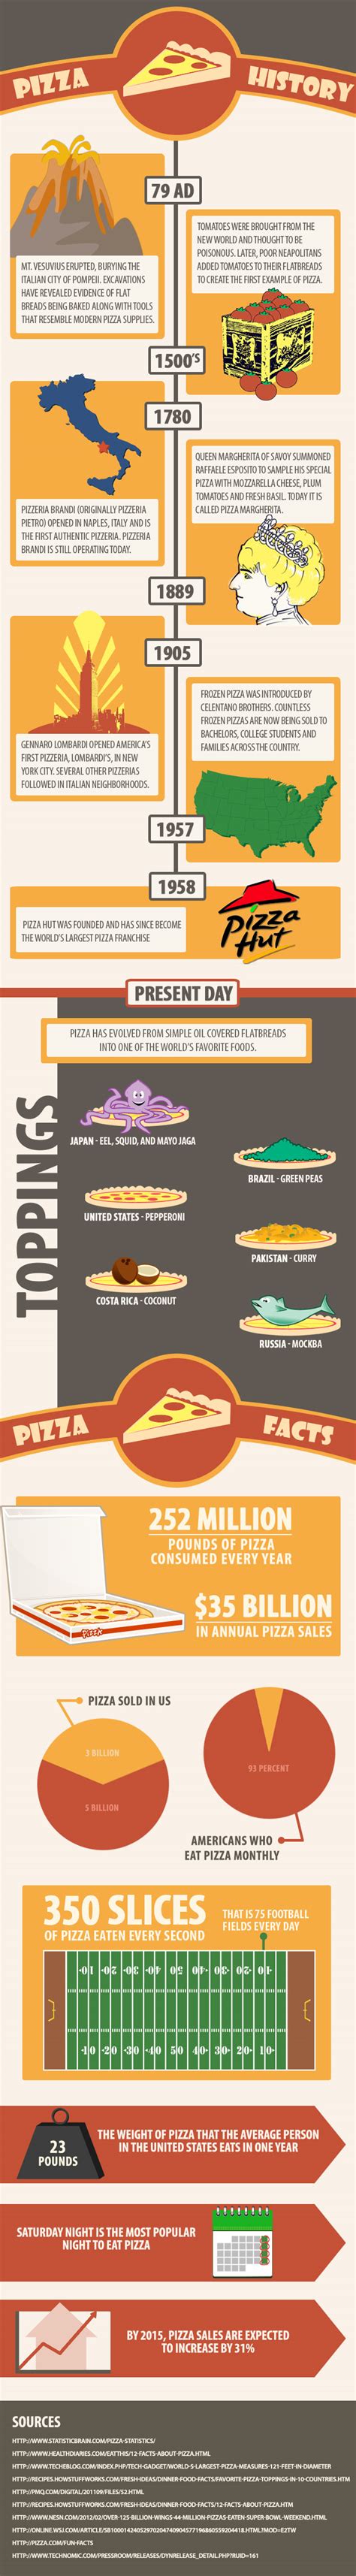 Timeline Infographic: The History of Pizza | History of ...